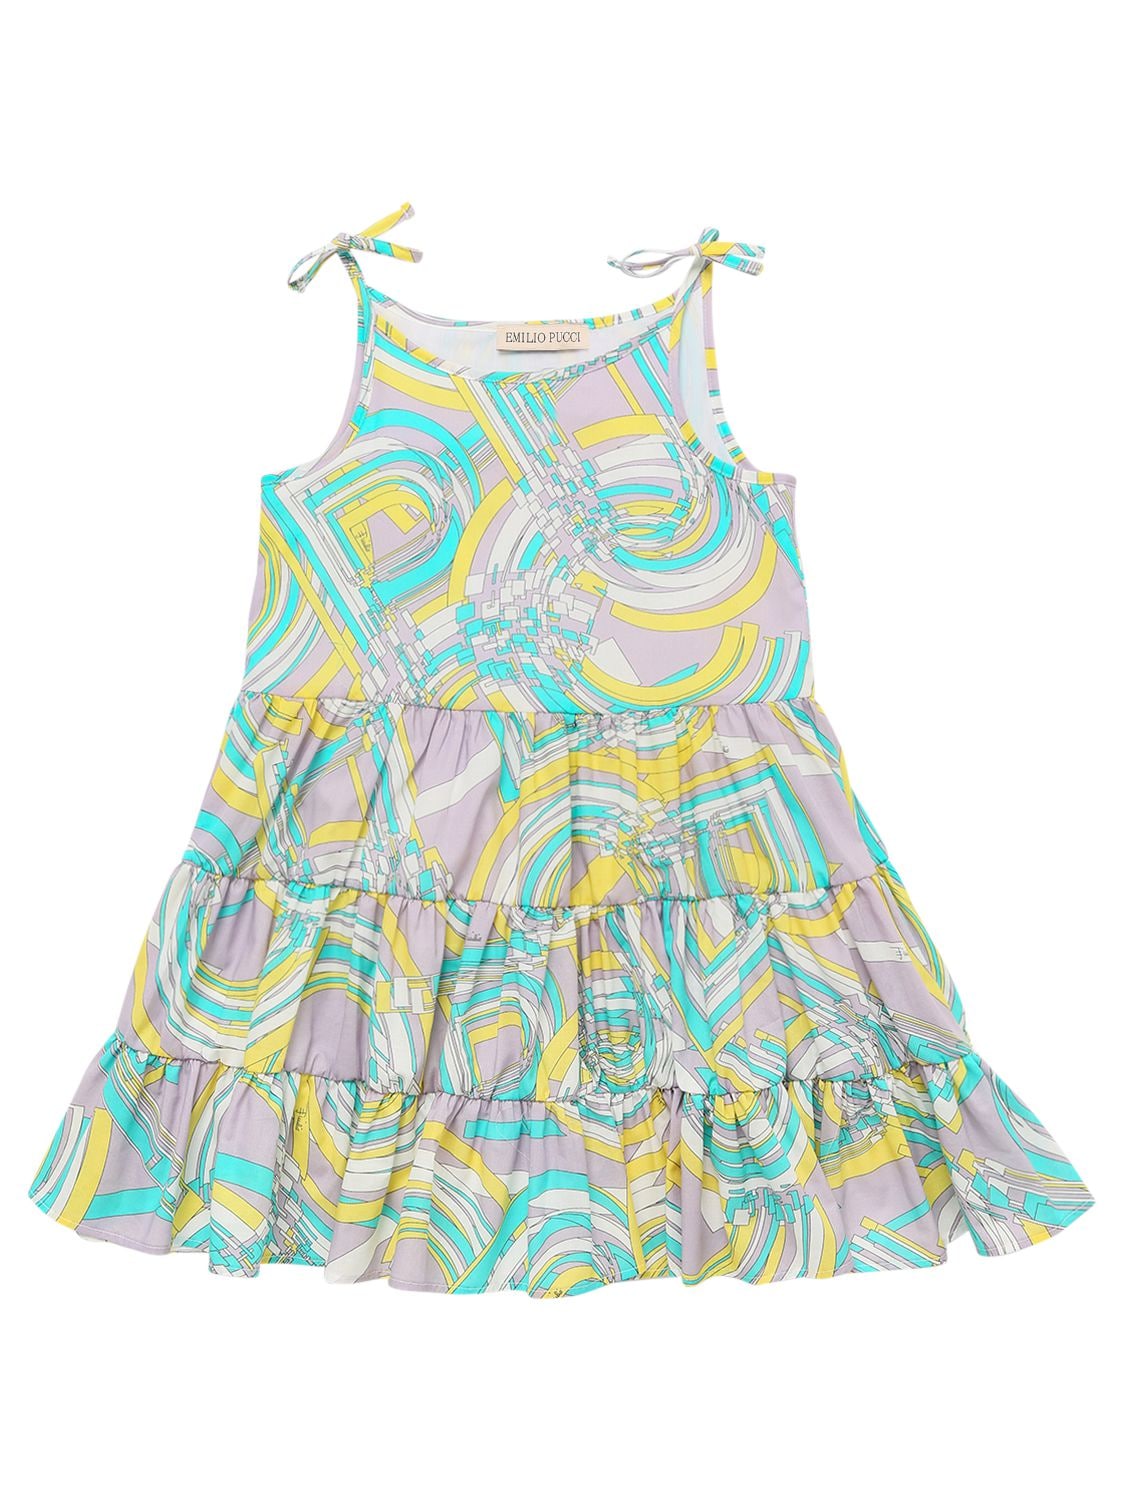 EMILIO PUCCI PRINTED TIERED COTTON DRESS